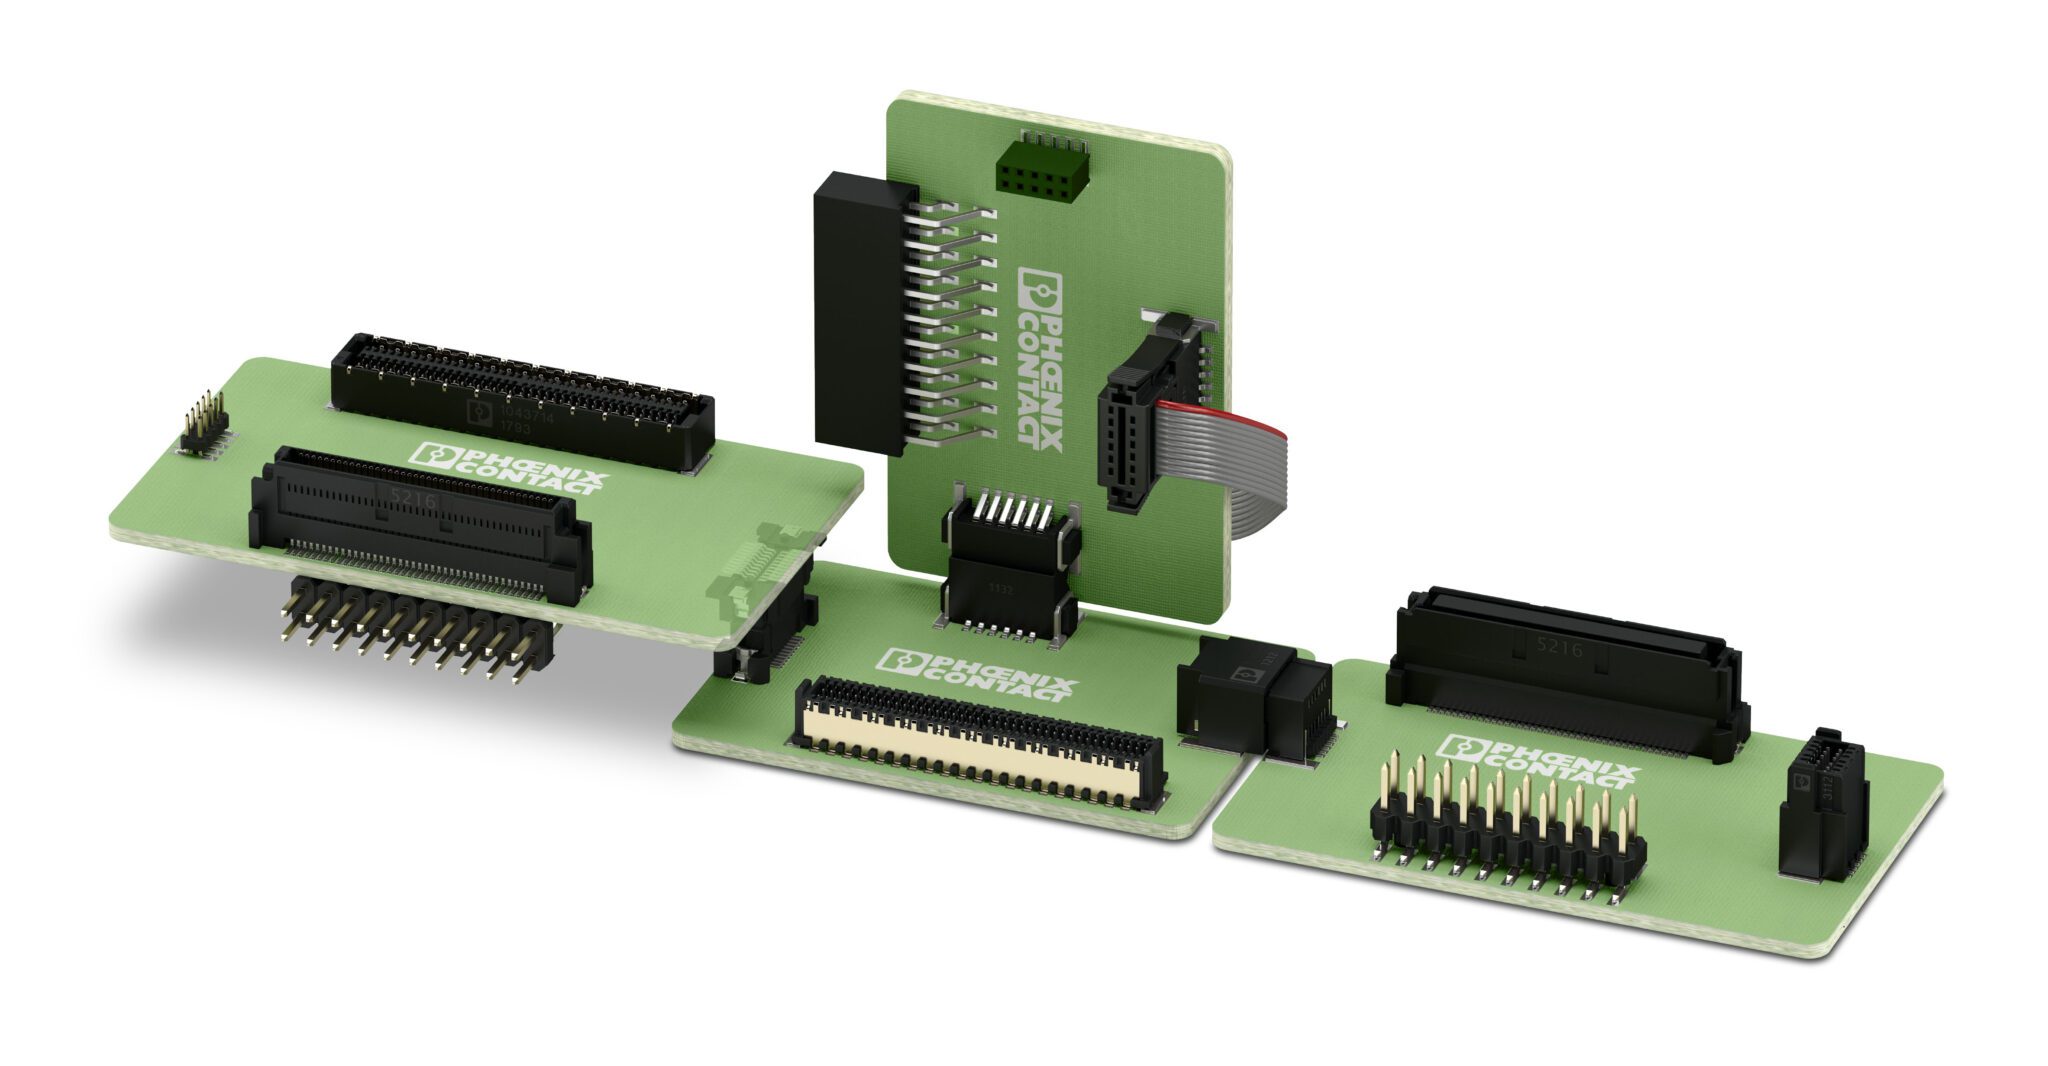 The board-to-board connectors of Phoenix Contact’s FINEPITCH product range